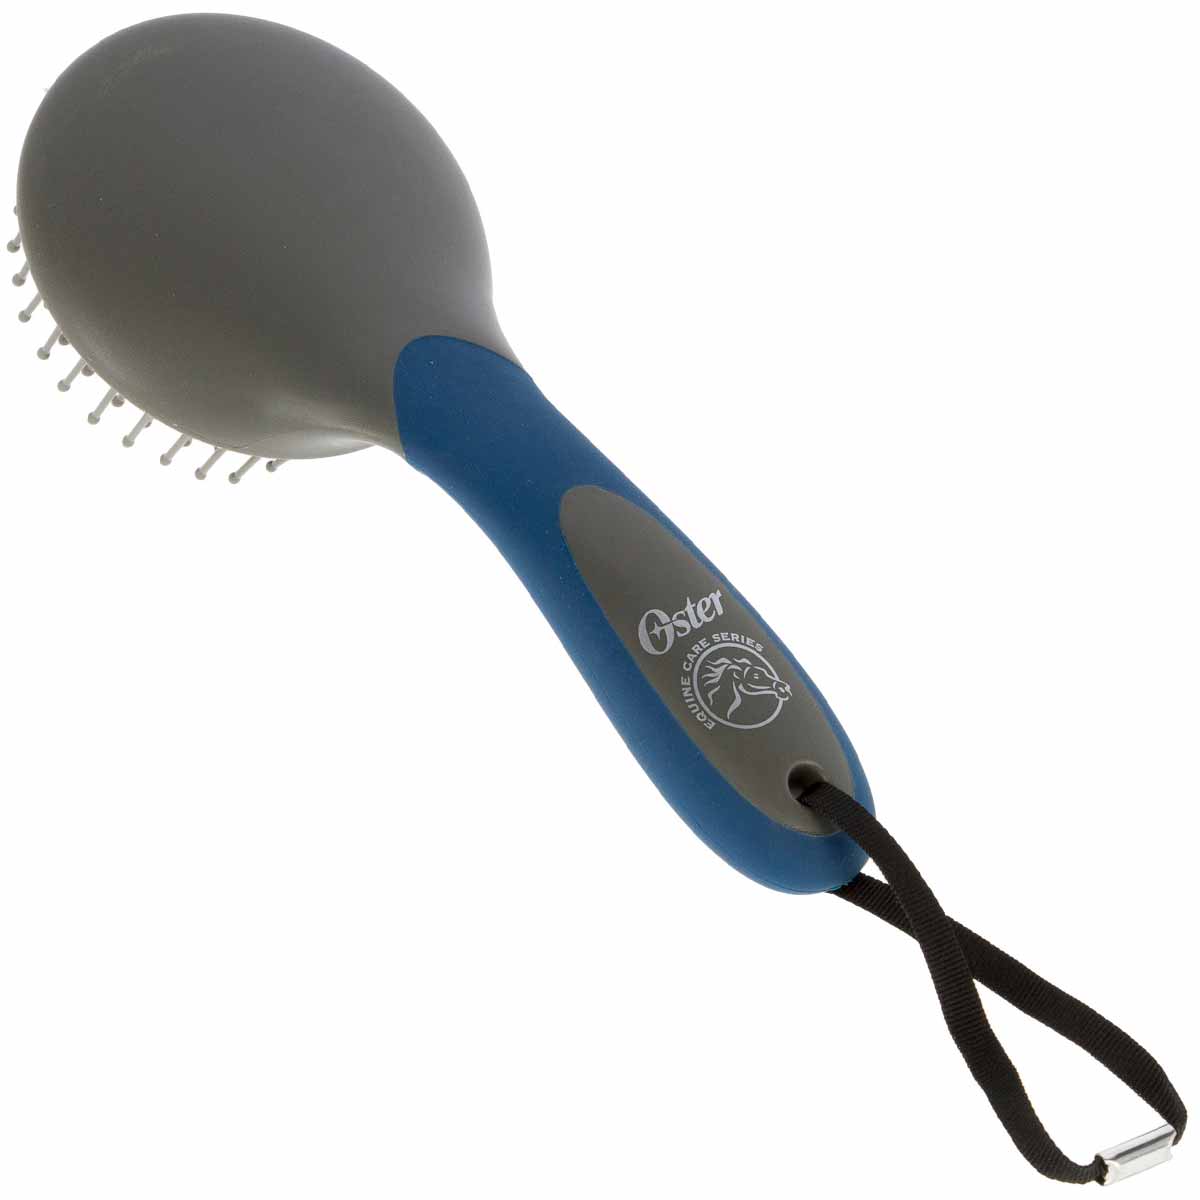 Oster Equine Care Series Mane and Tail Brush